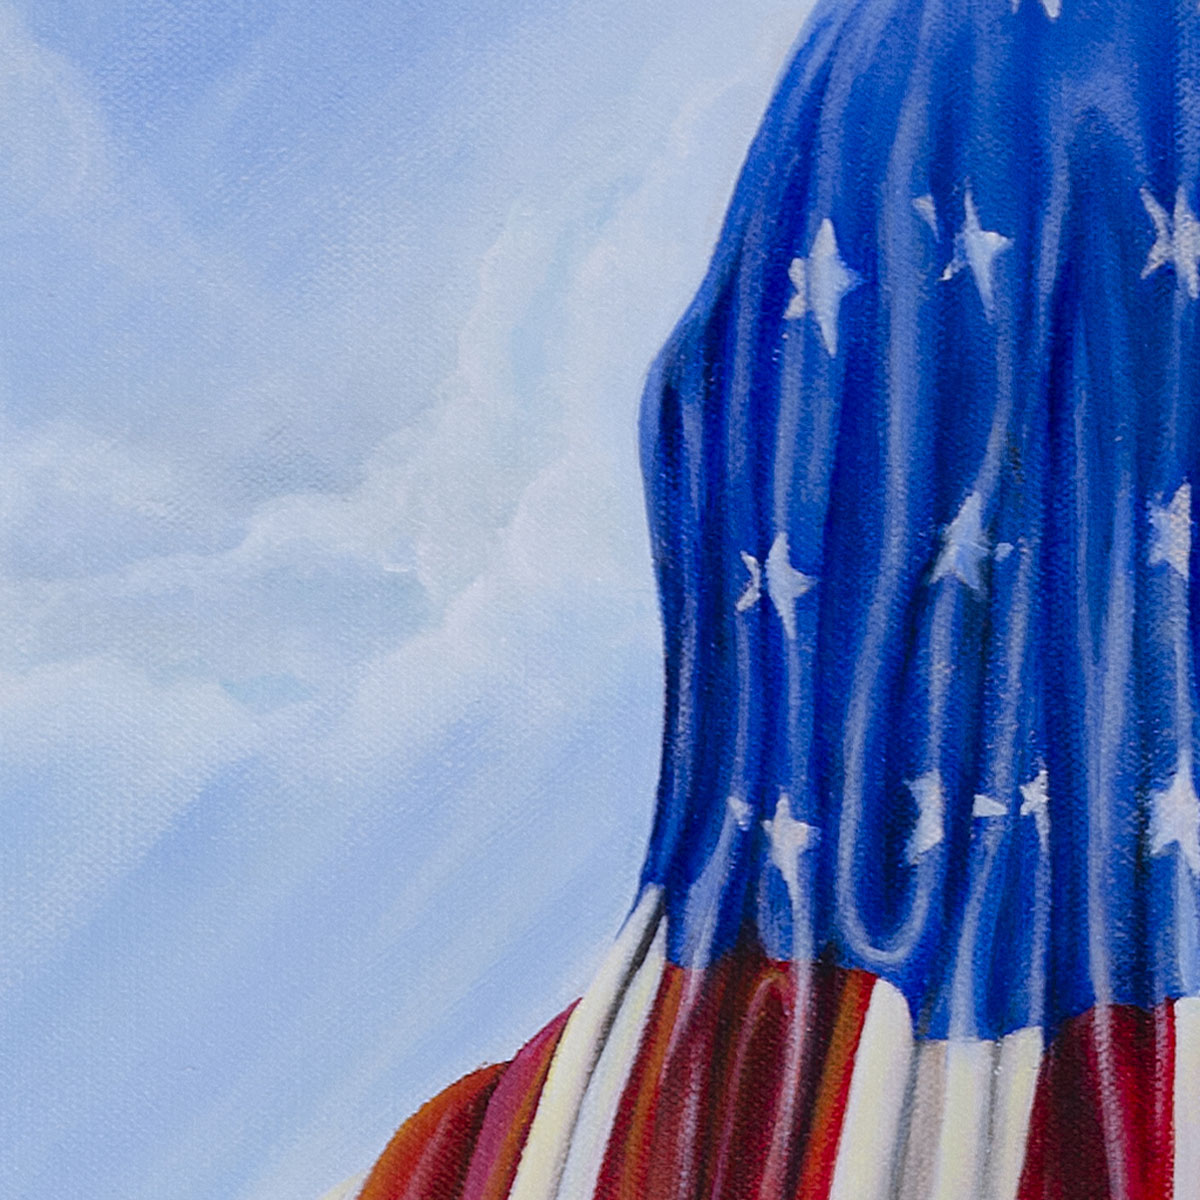 Back of man's head draped in American flag